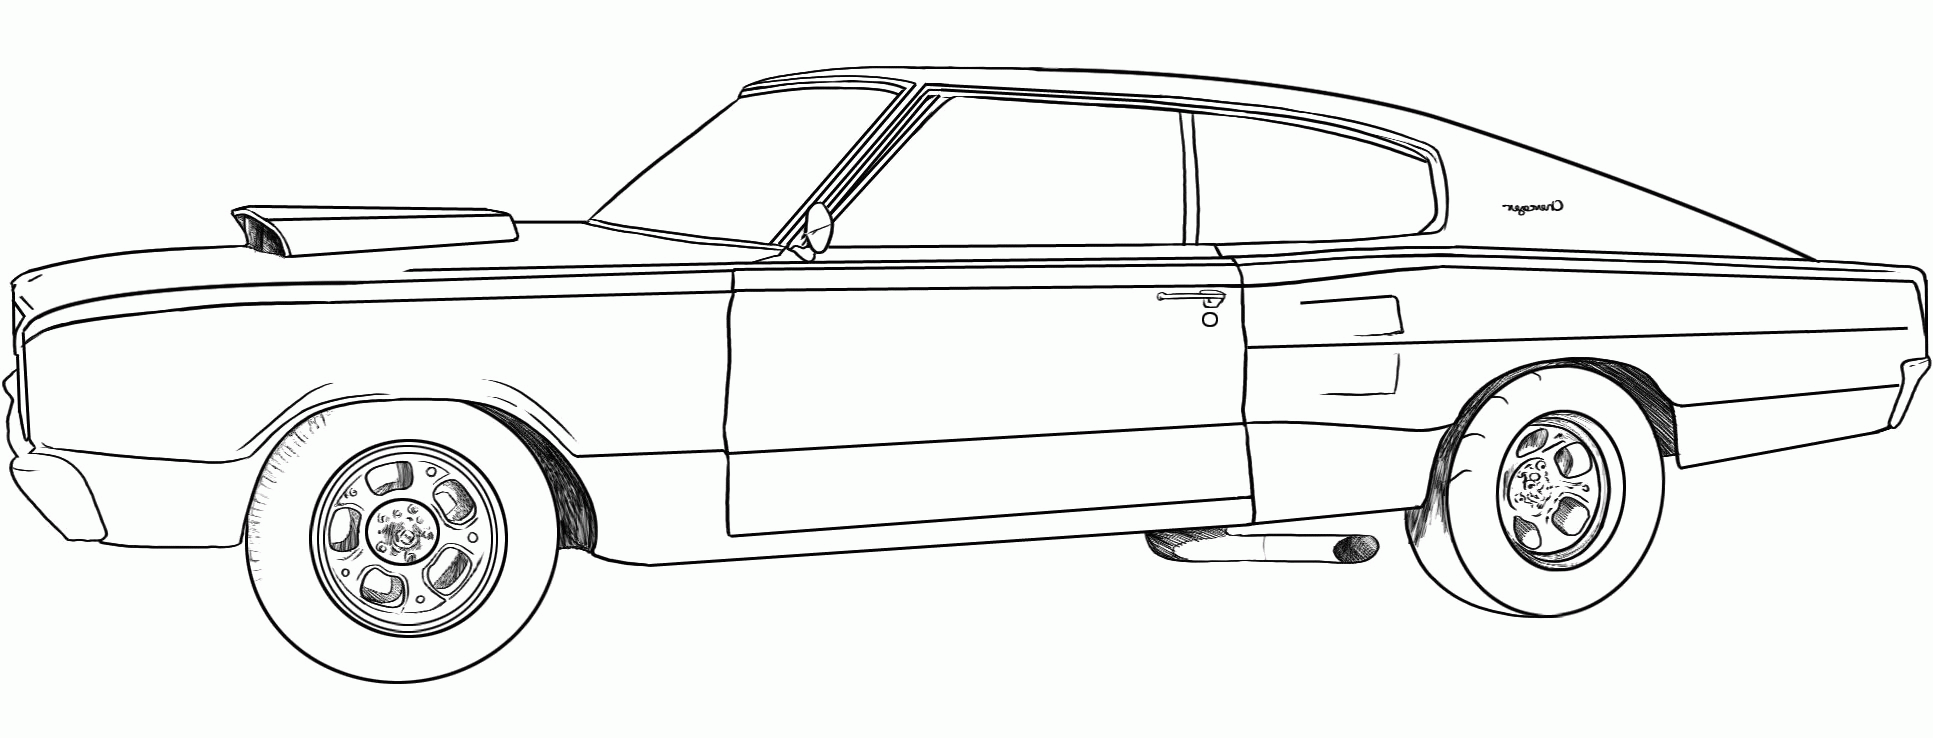 Dodge Challenger Coloring Pages Related Keywords & Suggestions ...